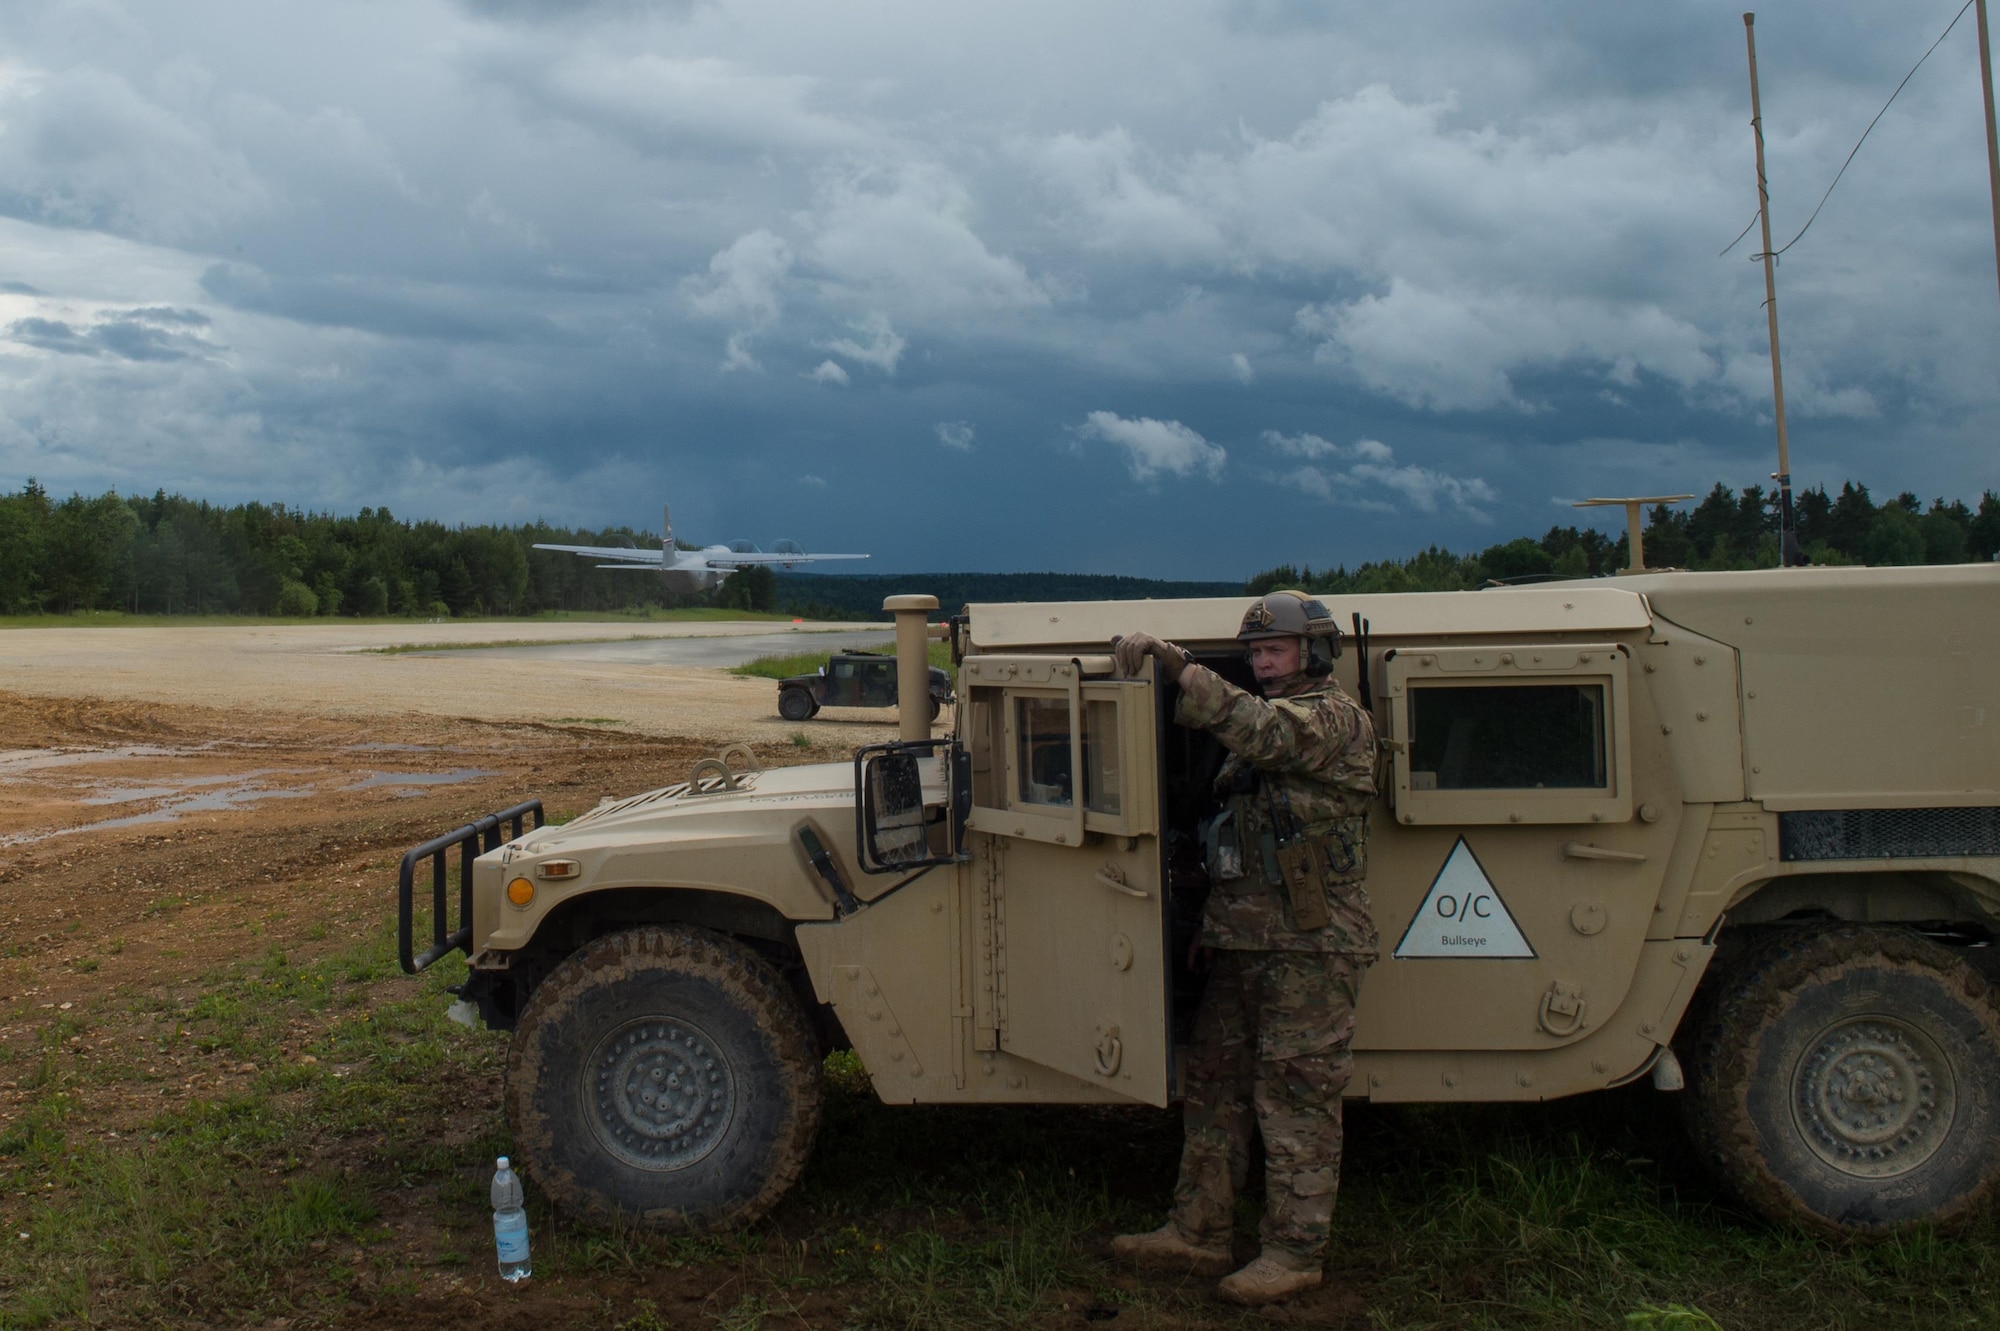 Maj. Aaron Cook, a 621st Mobility Support Operations Squadron air mobility liaison officer to the 2nd Cavalry Regiment/Joint Multinational Training Center, looks on as a C-130J Super Hercules from Dyess Air Force Base, Texas, takes off during exercise Swift Response 16 at Hohenfels Training Area, Germany, June 17, 2016. Swift Response is one of the premier military crisis response training events for multinational airborne forces in the world. This year, the exercise had more than 5,000 participants from 10 NATO nations. (U.S. Air Force photo/Master Sgt. Joseph Swafford)